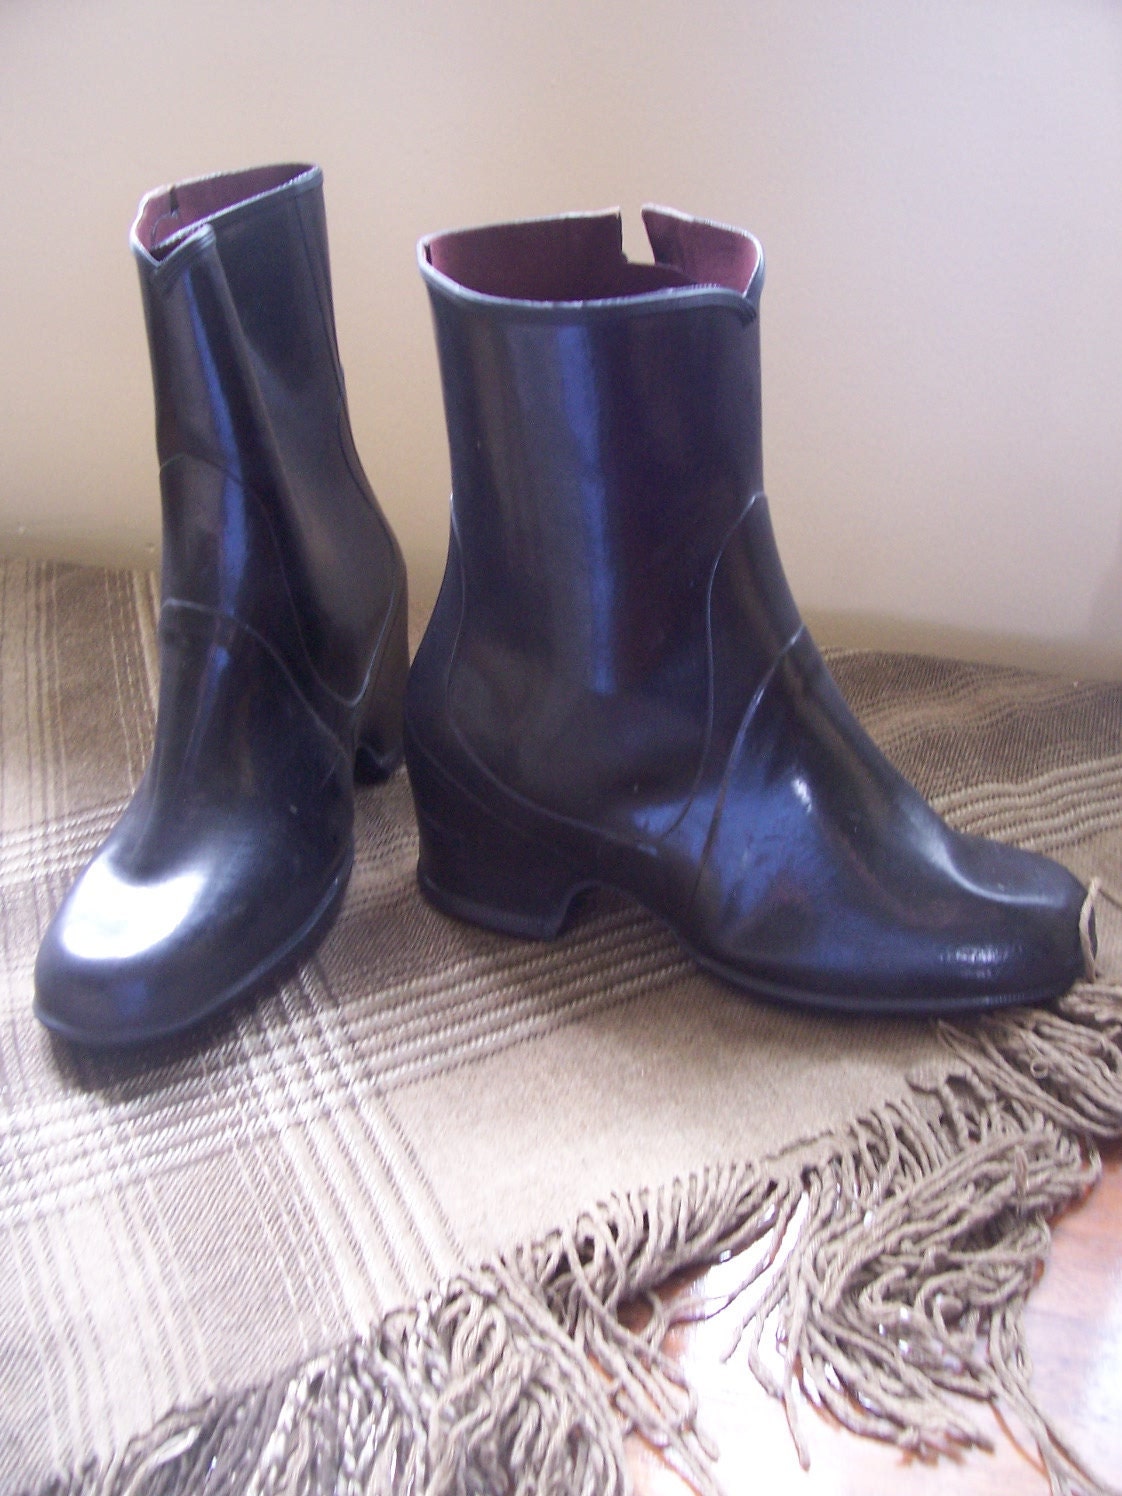 Vintage 1930s or 1940s women's galoshes or overshoes size 7